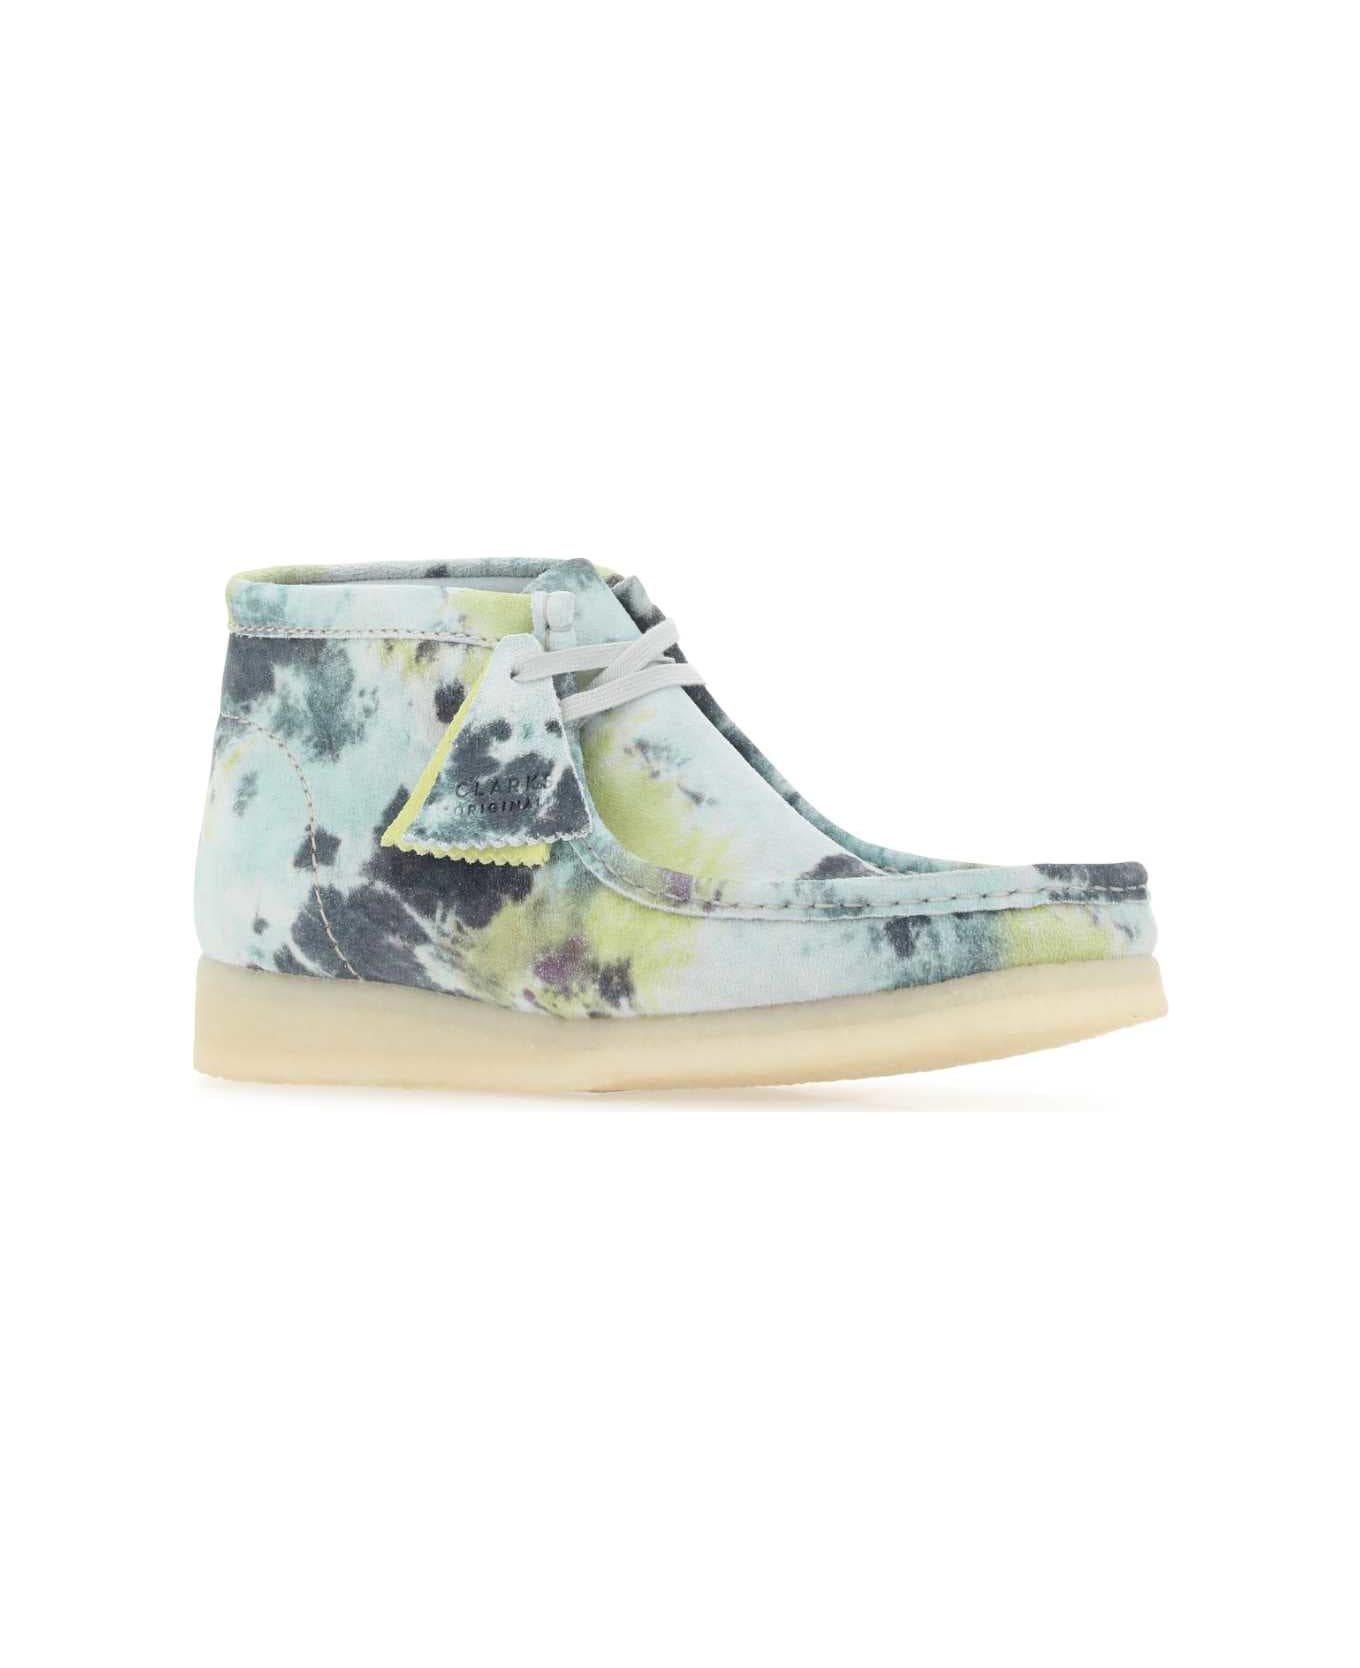 Clarks Printed Suede Wallabee Ankle Boots - MTURQUOISE ブーツ